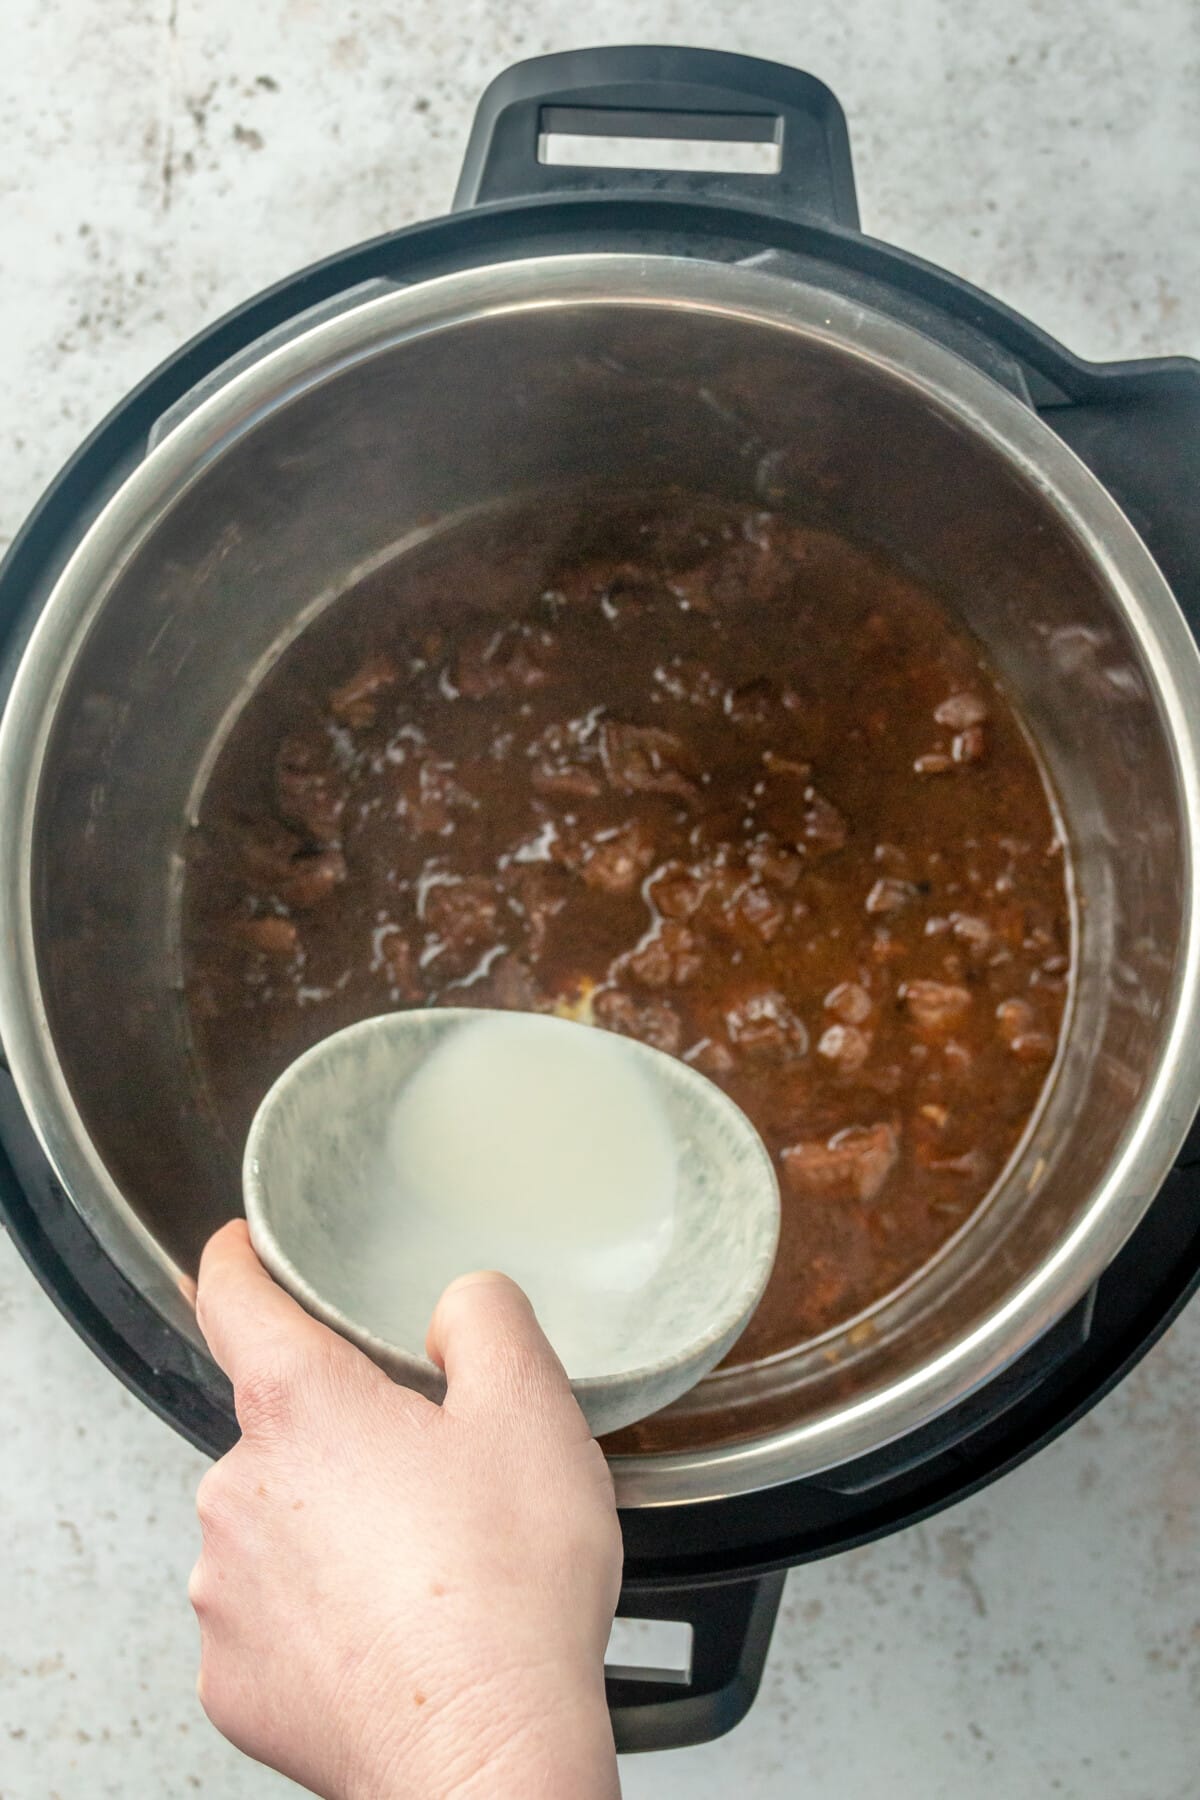 A corn starch slurry is added to a beef dish in an instant pot on a light grey colored surface.